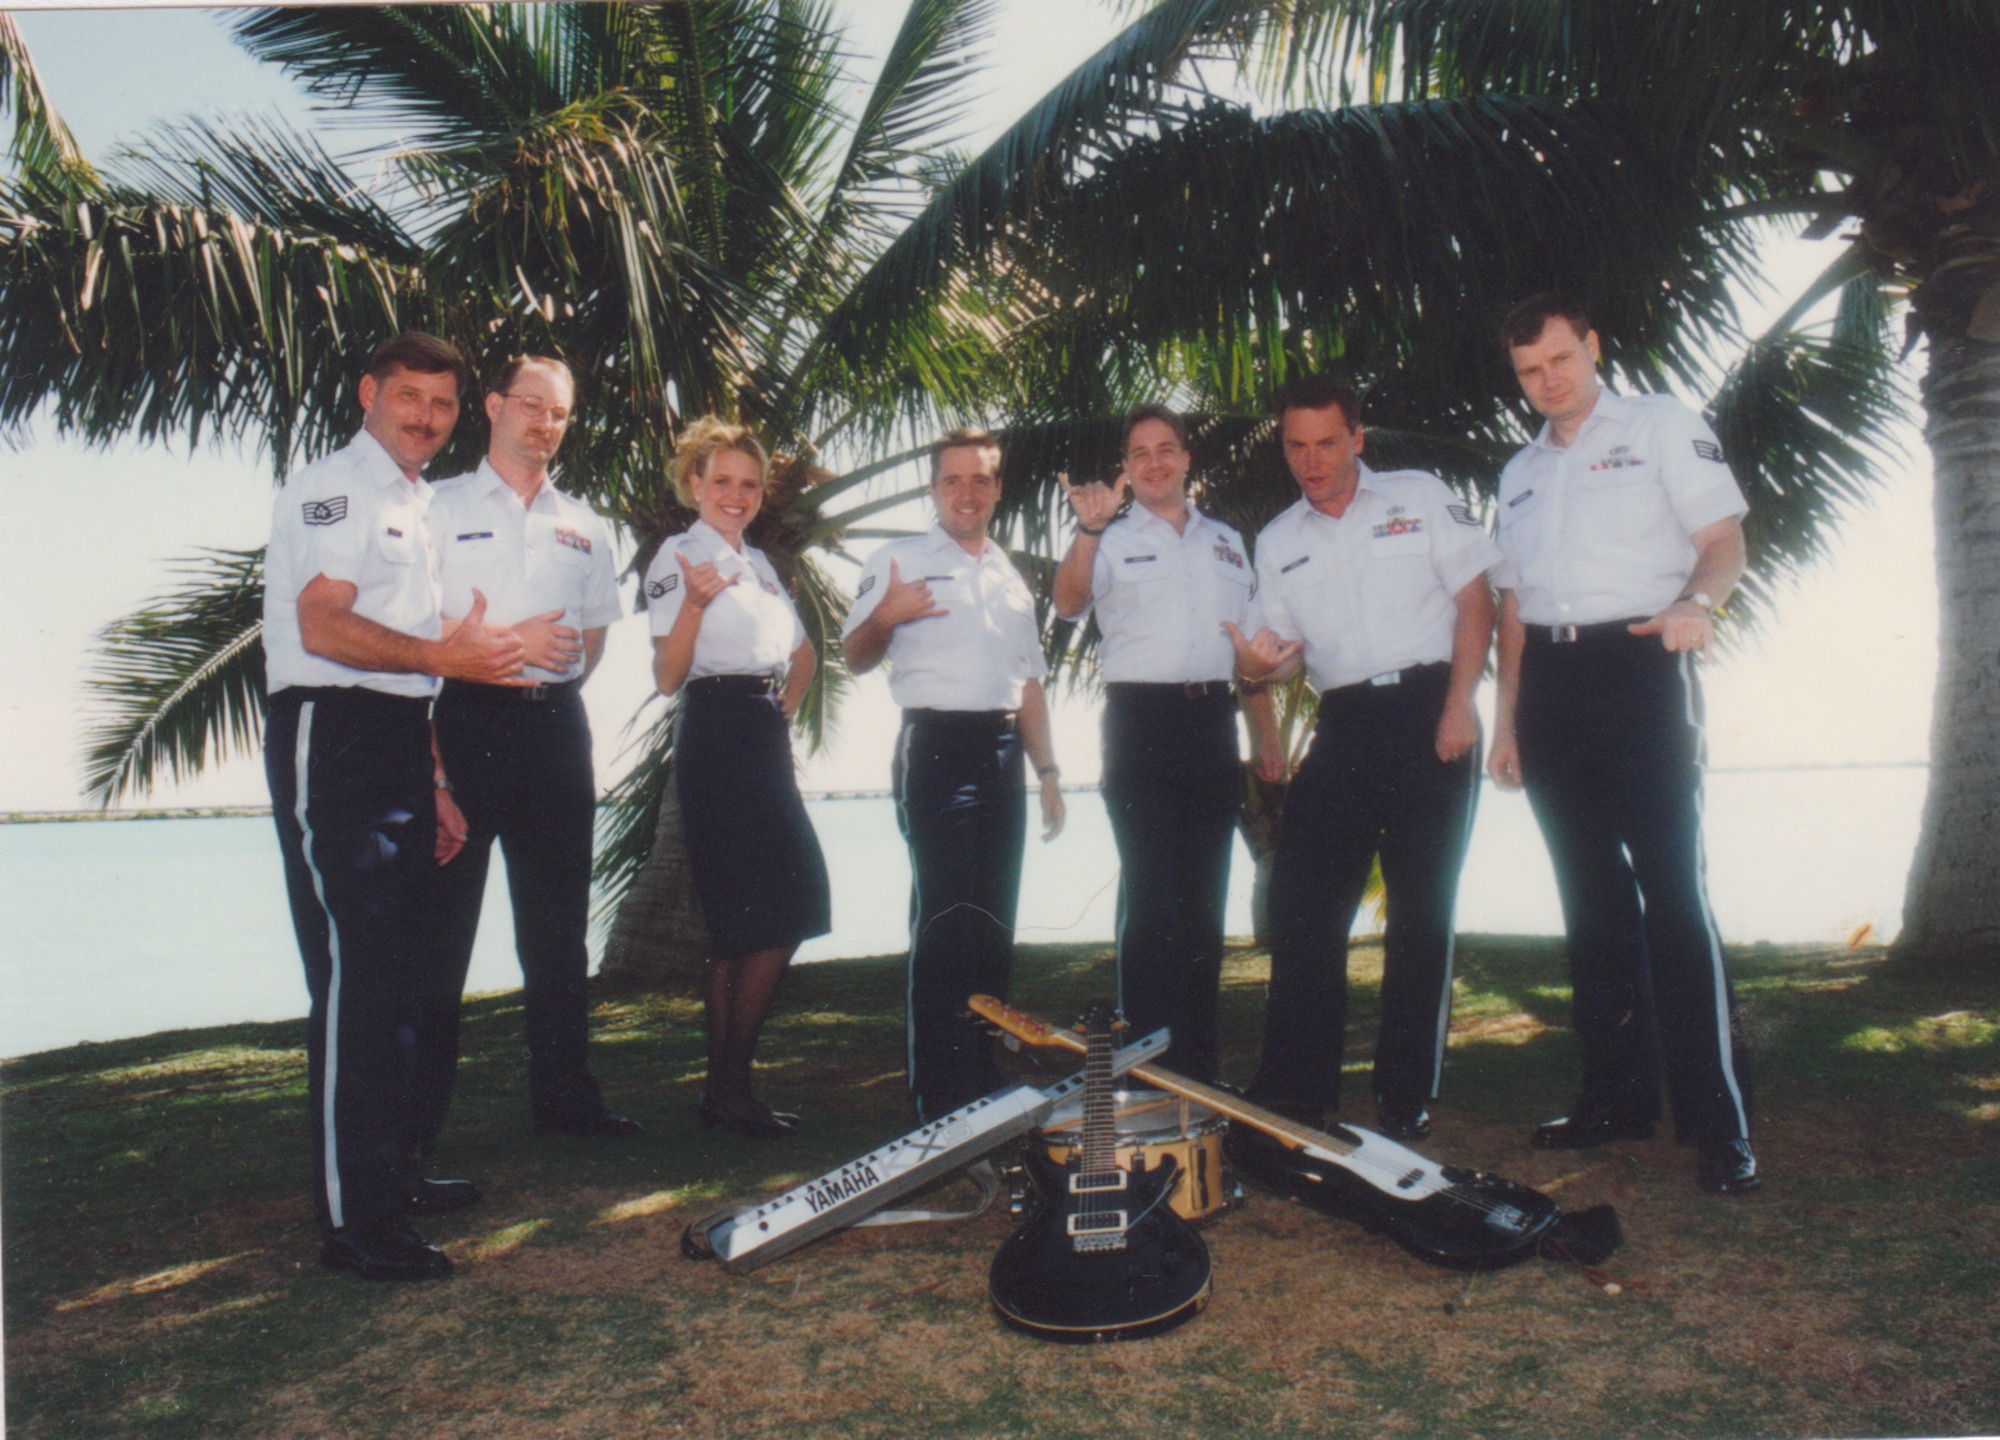 USAF Band of the Pacific